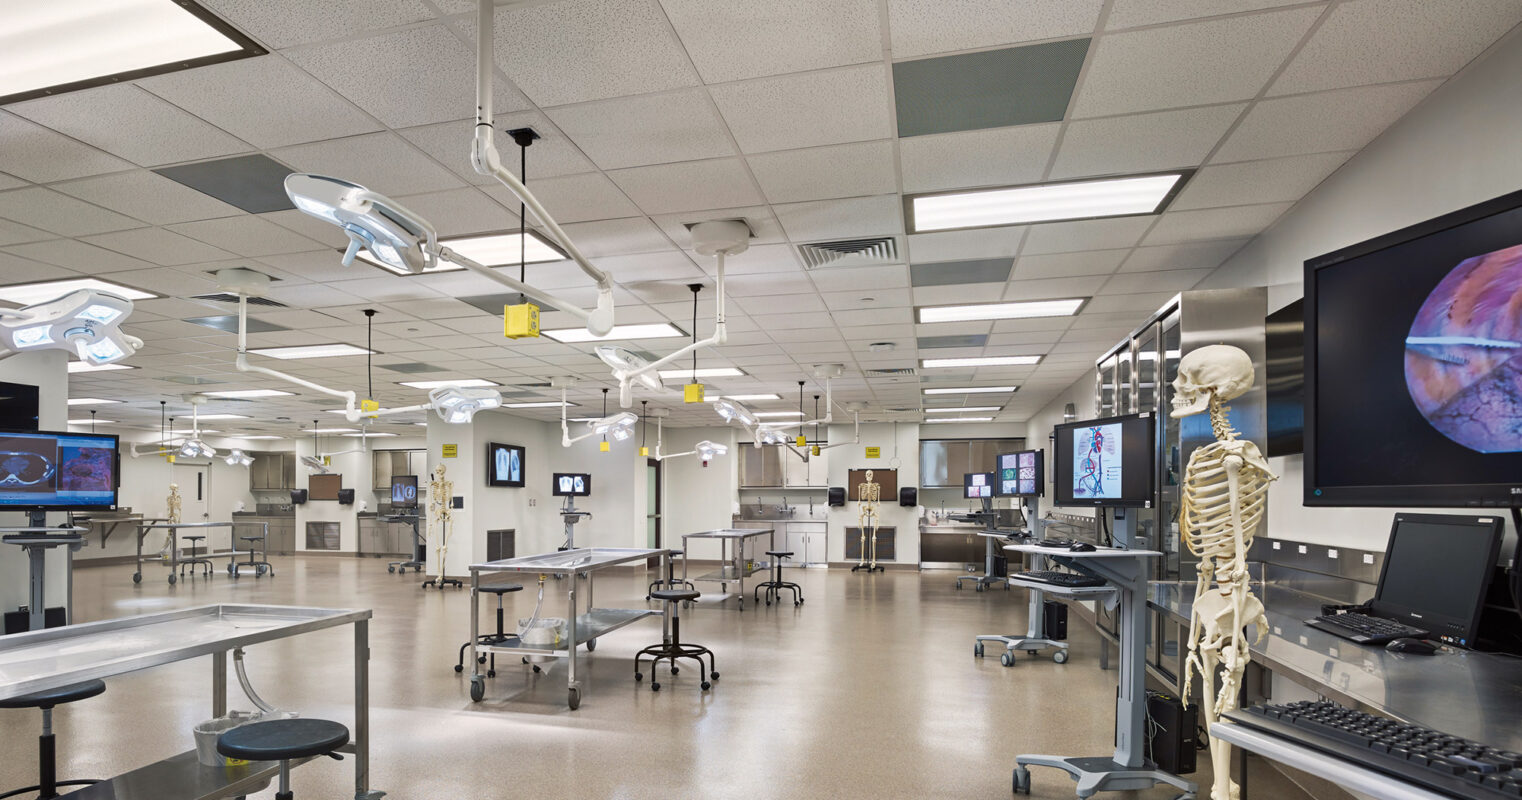 Spacious, modern medical laboratory interior with stainless steel autopsy tables, overhead surgical lights, and multiple computer stations. A human skeleton model stands on the right, with a large monitor displaying a cellular image in the background, reflecting a practical educational environment.